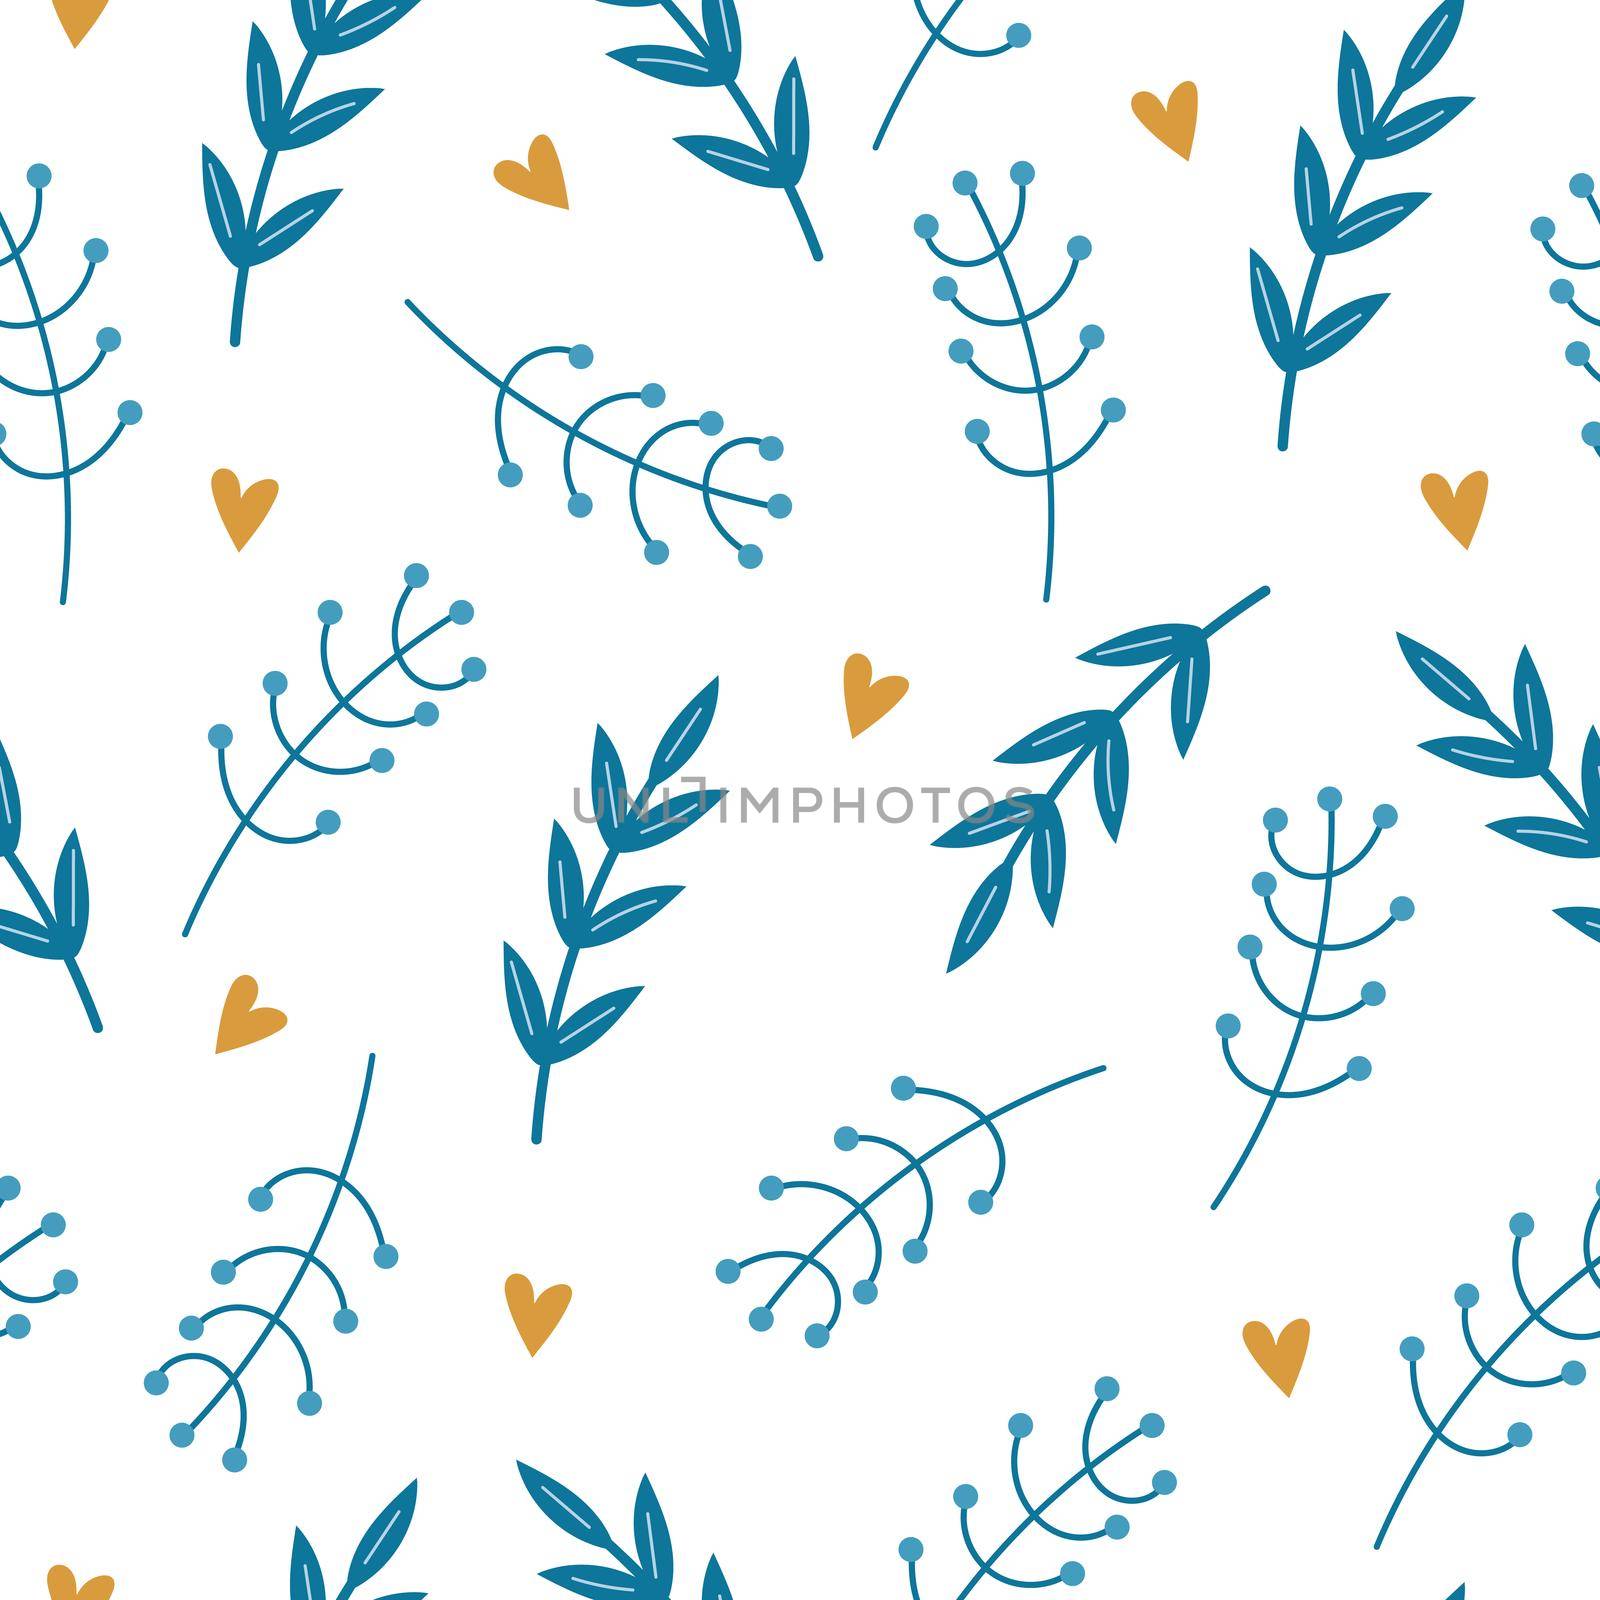 Hand drawn blue small twigs, abstract leaves and hearts - Repeating Pattern. Seamless pattern for wallpaper, greeting cards, wrapping, home decor